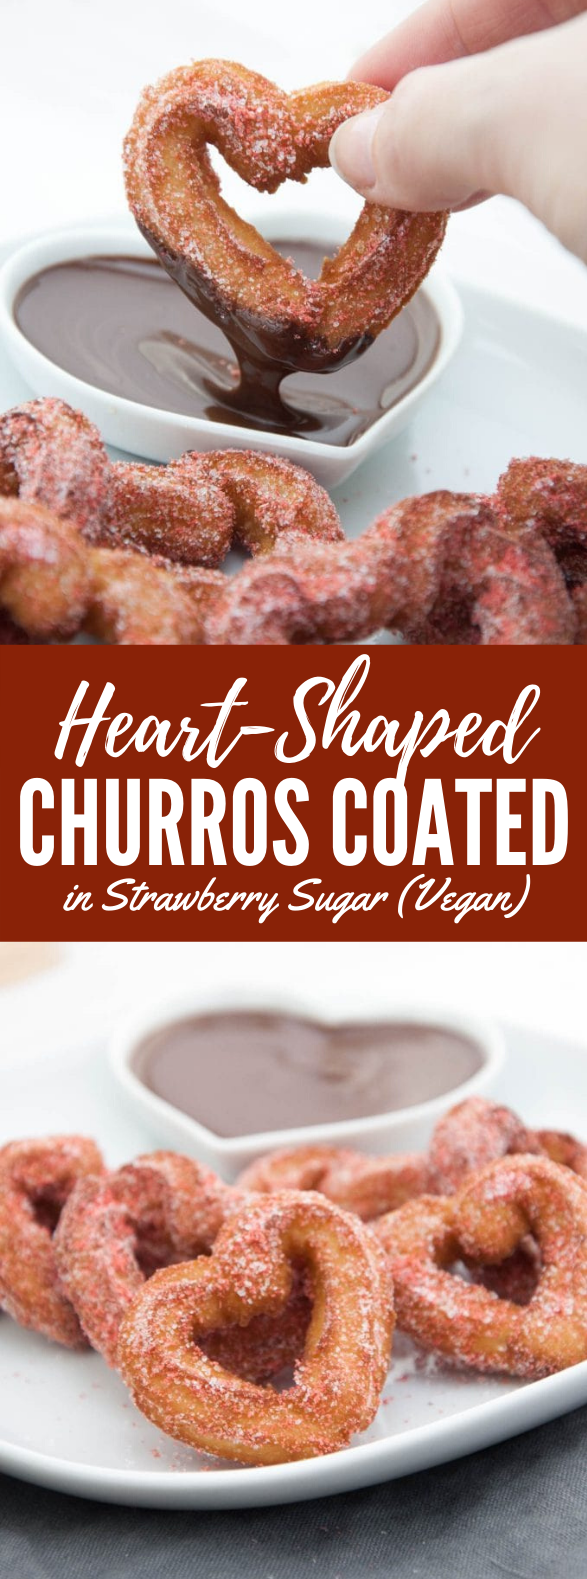 HEART-SHAPED CHURROS COATED WITH STRAWBERRY SUGAR #desserts #vegan